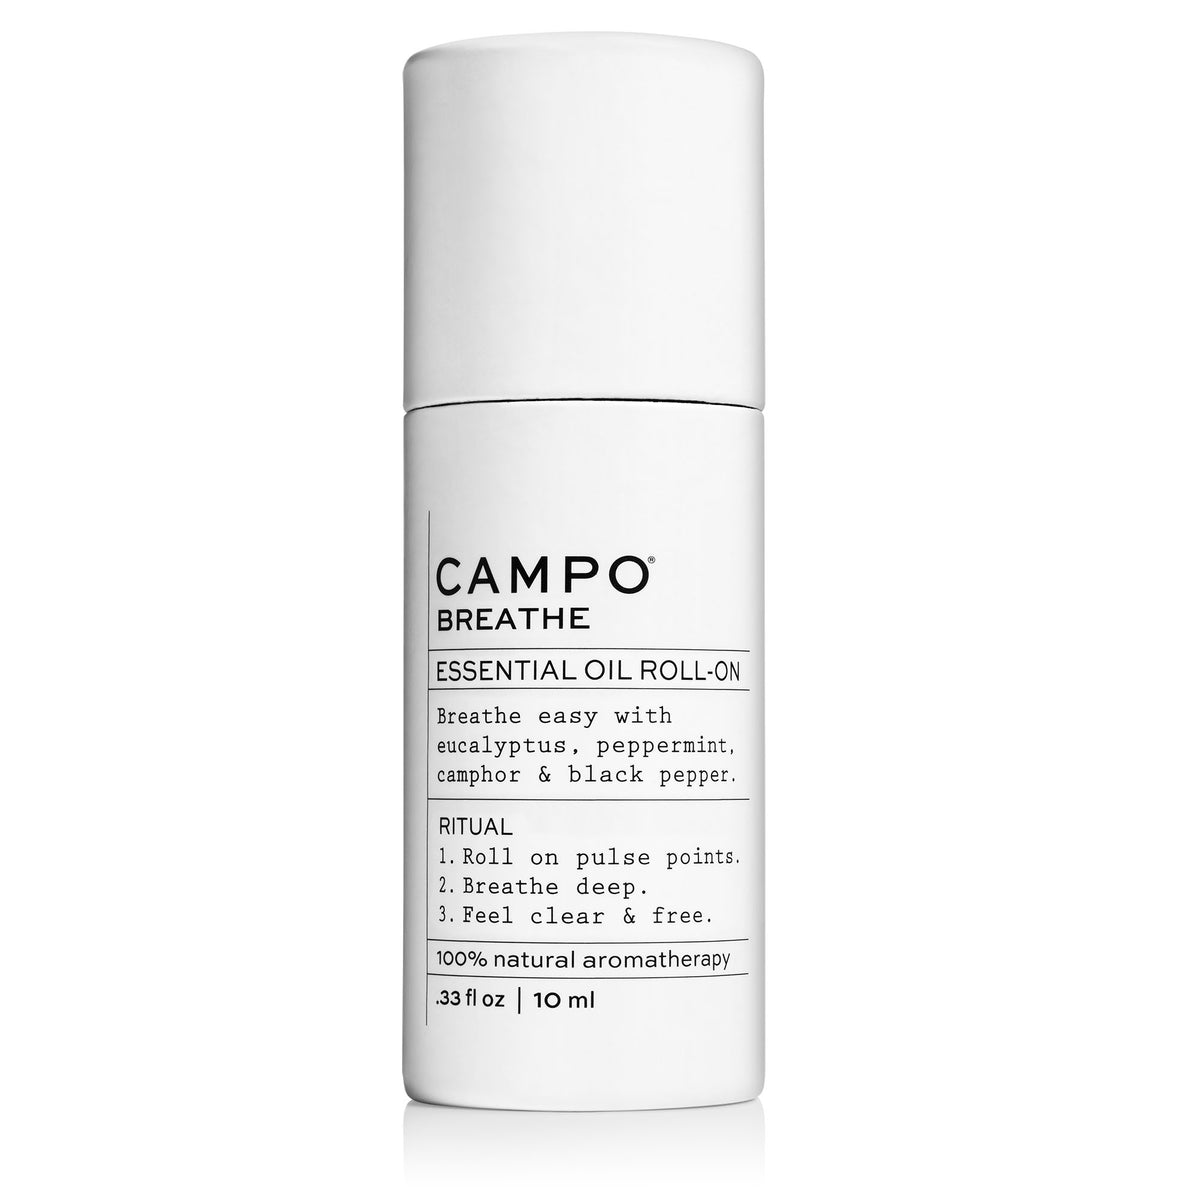 CAMPO Beauty 10 ml package BREATHE Blend Essential Oil Roll-On. Breathe easy with this essential oil blend of eucalyptus, peppermint, camphor &amp; black pepper. Blended with 100% natural beauty carrier oils. Jet set and ready to roll. 